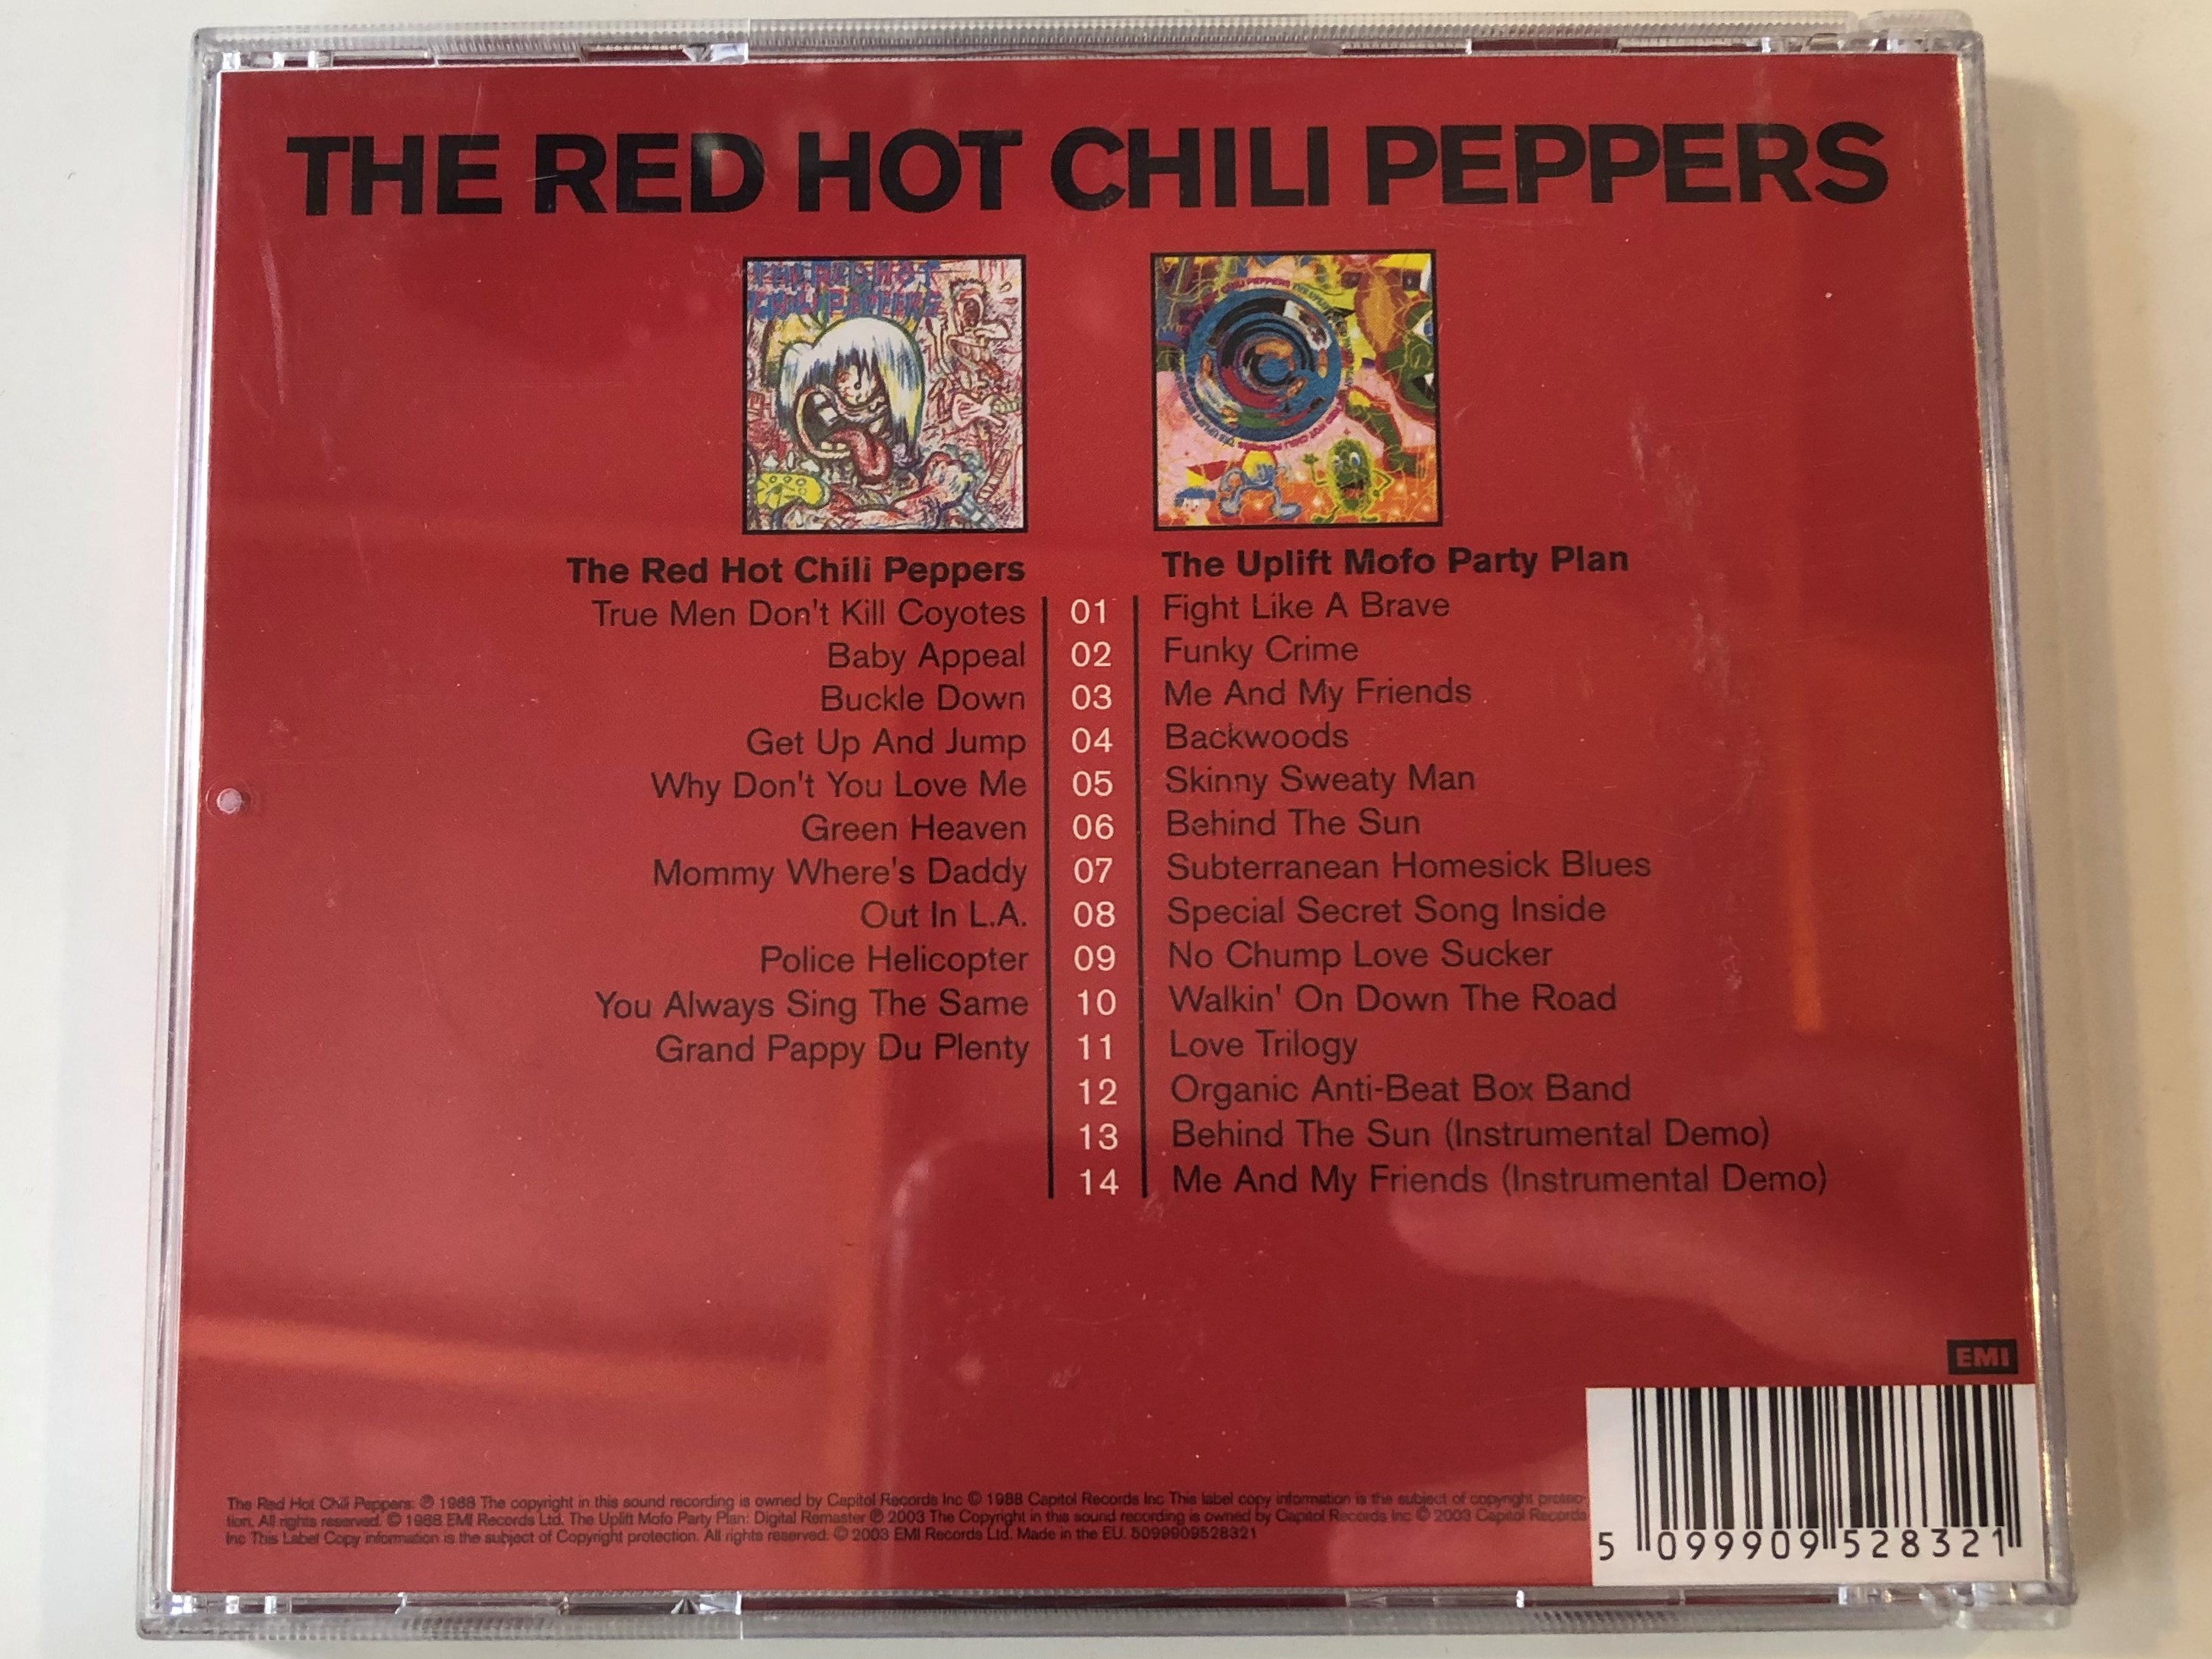 the-red-hot-chili-peppers-the-red-hot-chili-peppers-the-uplift-mofo-party-plan-2-original-classic-albums-emi-audio-cd-2003-5099909528321-2-.jpg